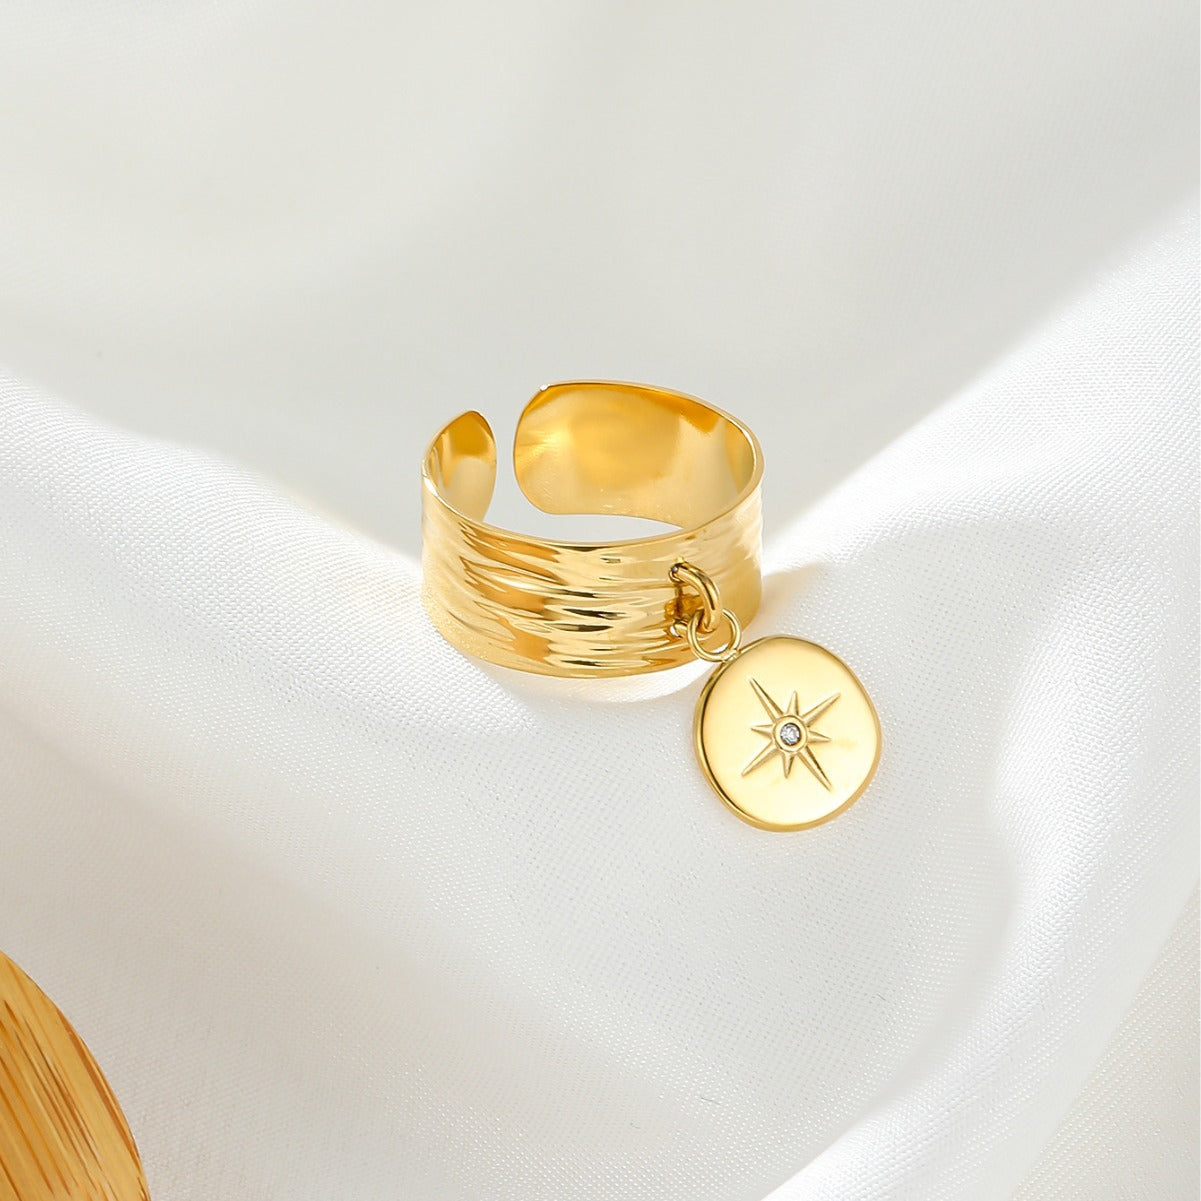 Six-pointed Star Inlaid Zircon Opening Adjustable Stainless Steel Gold-plated Ring